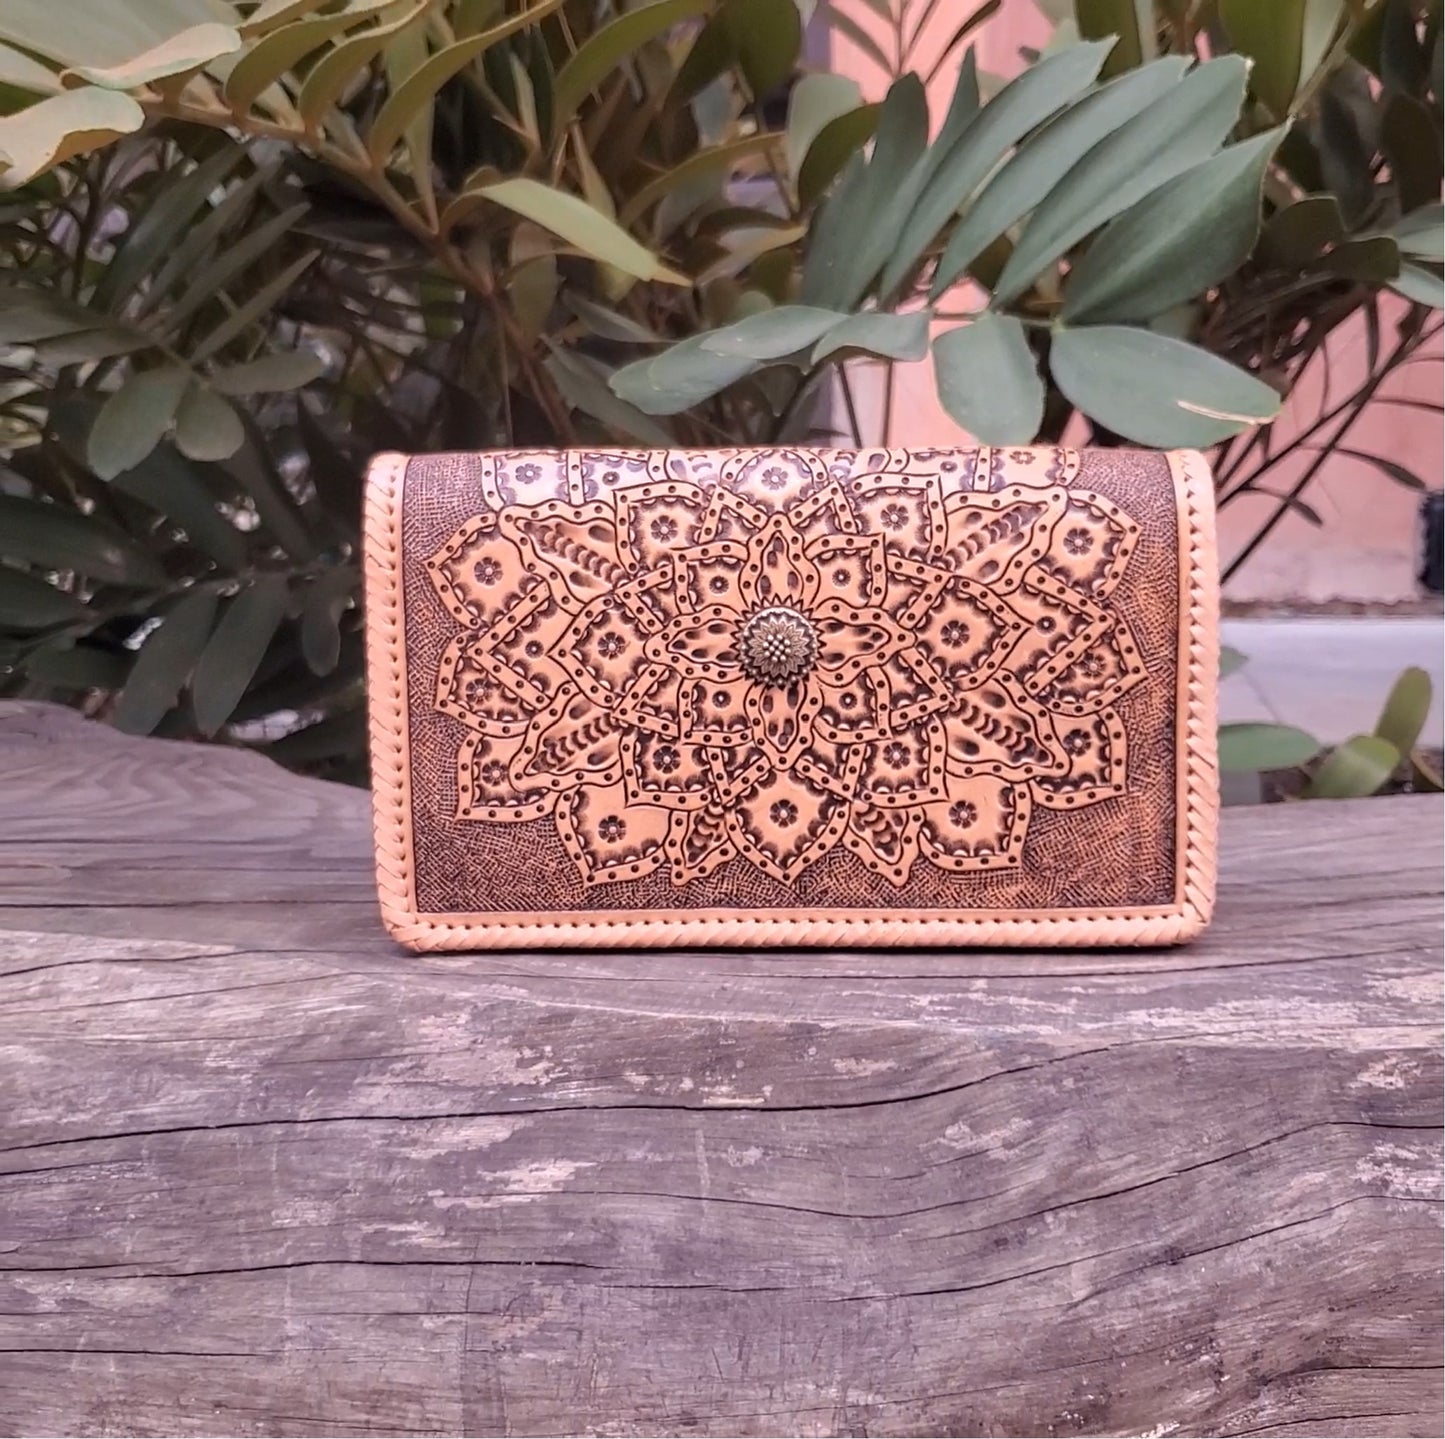 Hand Made Leather Crossbody Bag "CECELIA" by MIOHERMOSA Honey Cecilia Mayan Flower